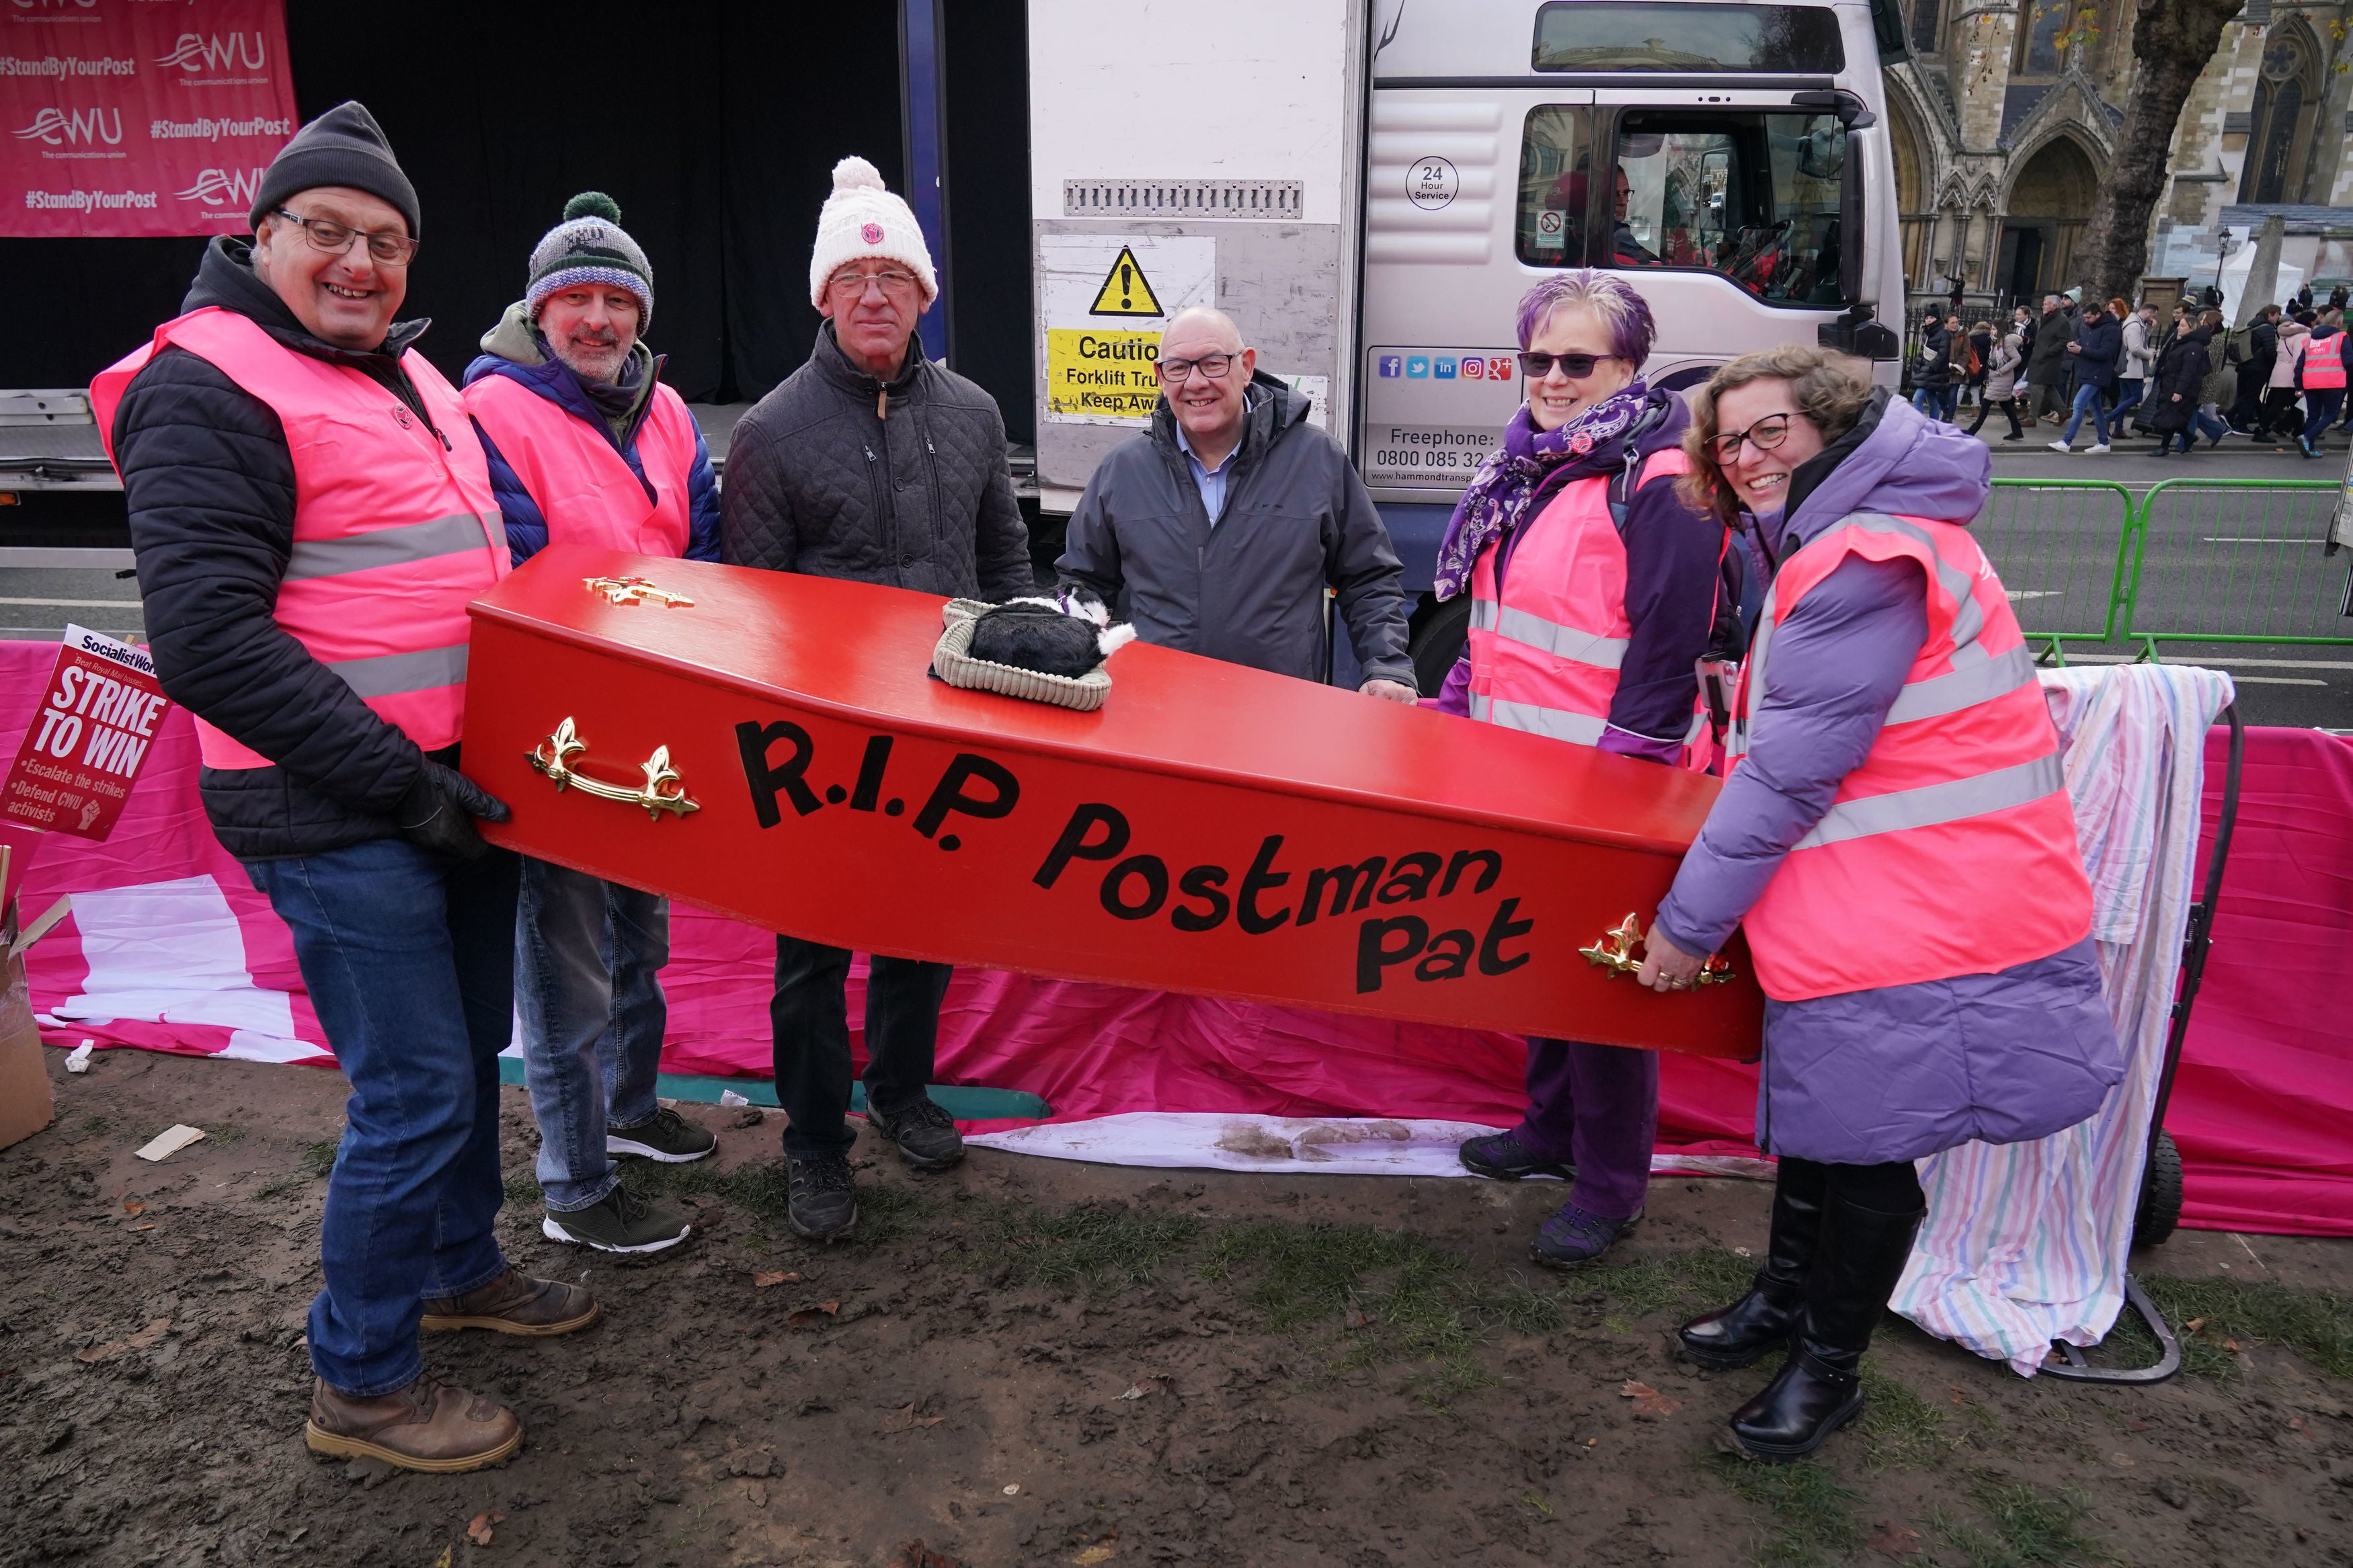 Striking postal workers hold coffin reading ‘R.I.P Postman Pat’ at Parliament Square rally